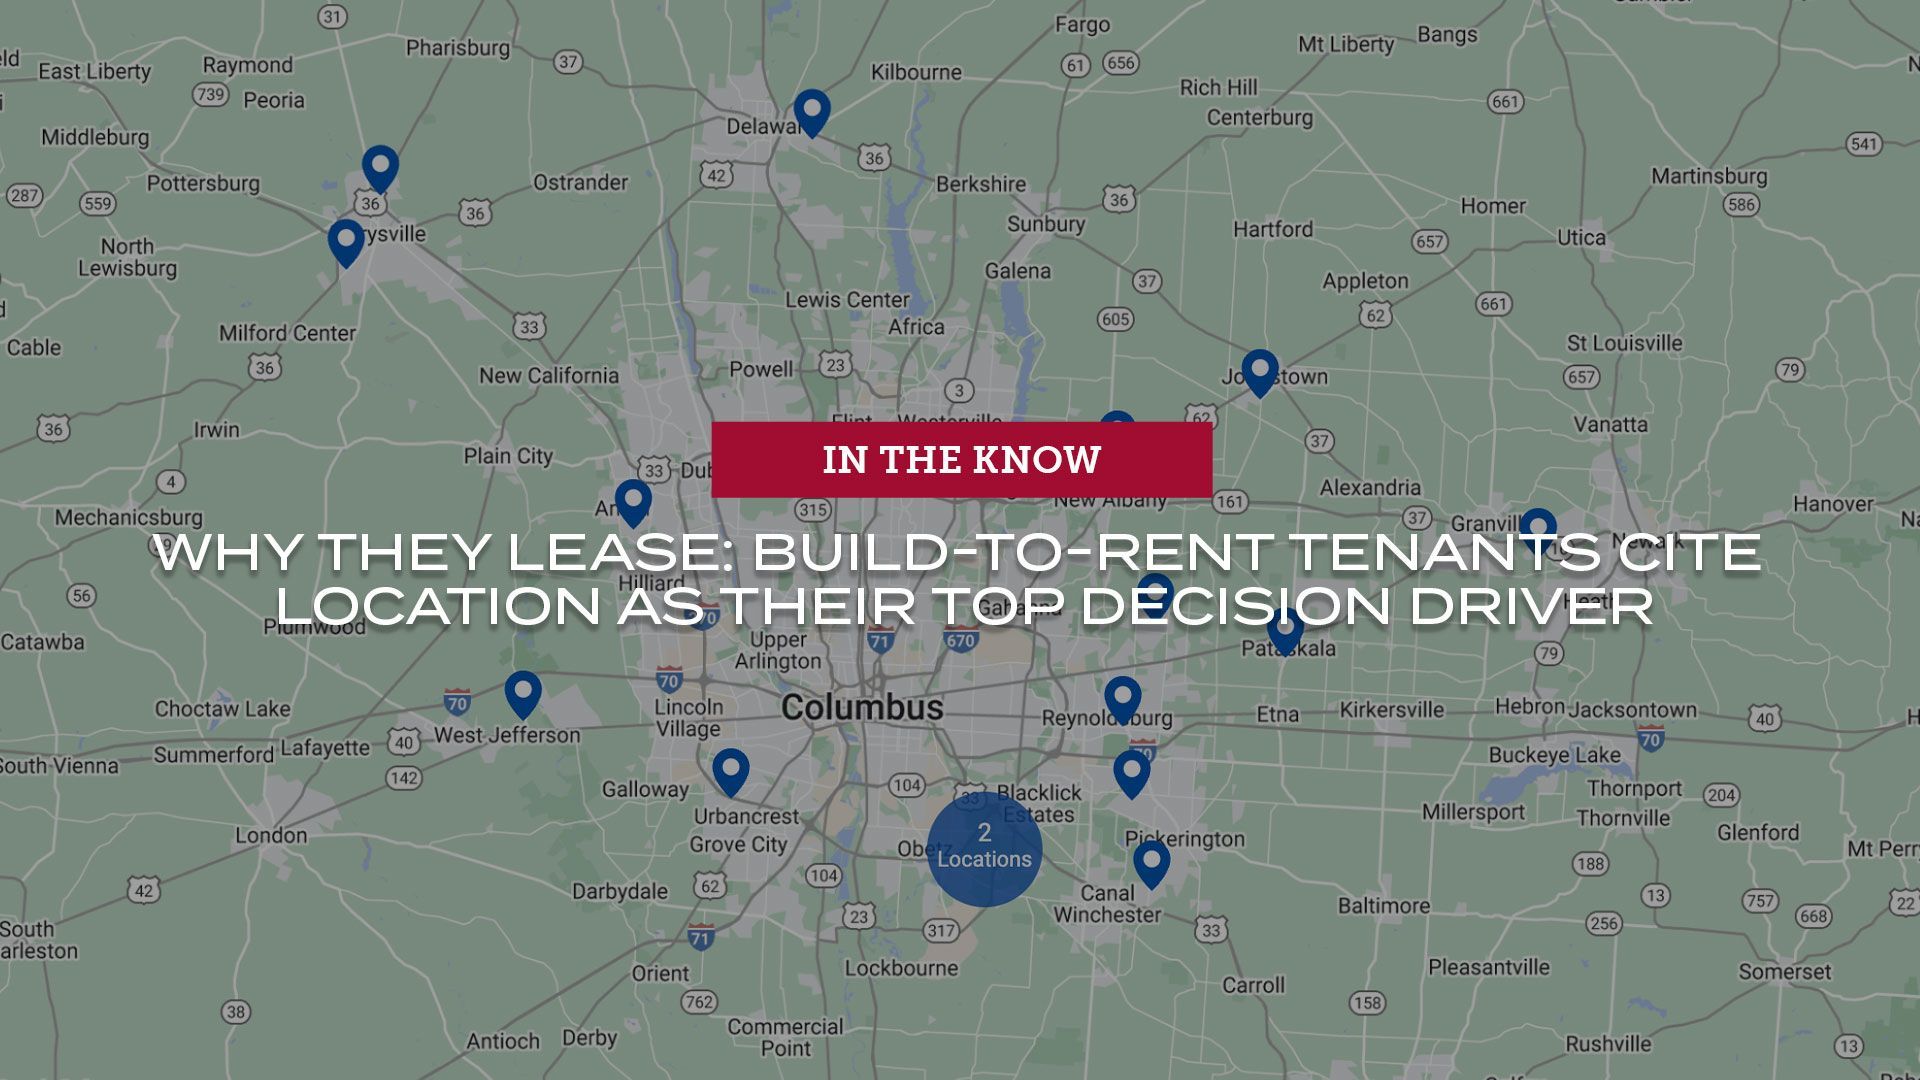 Why they lease: Build-to-rent tenants cite location as their top decision driver